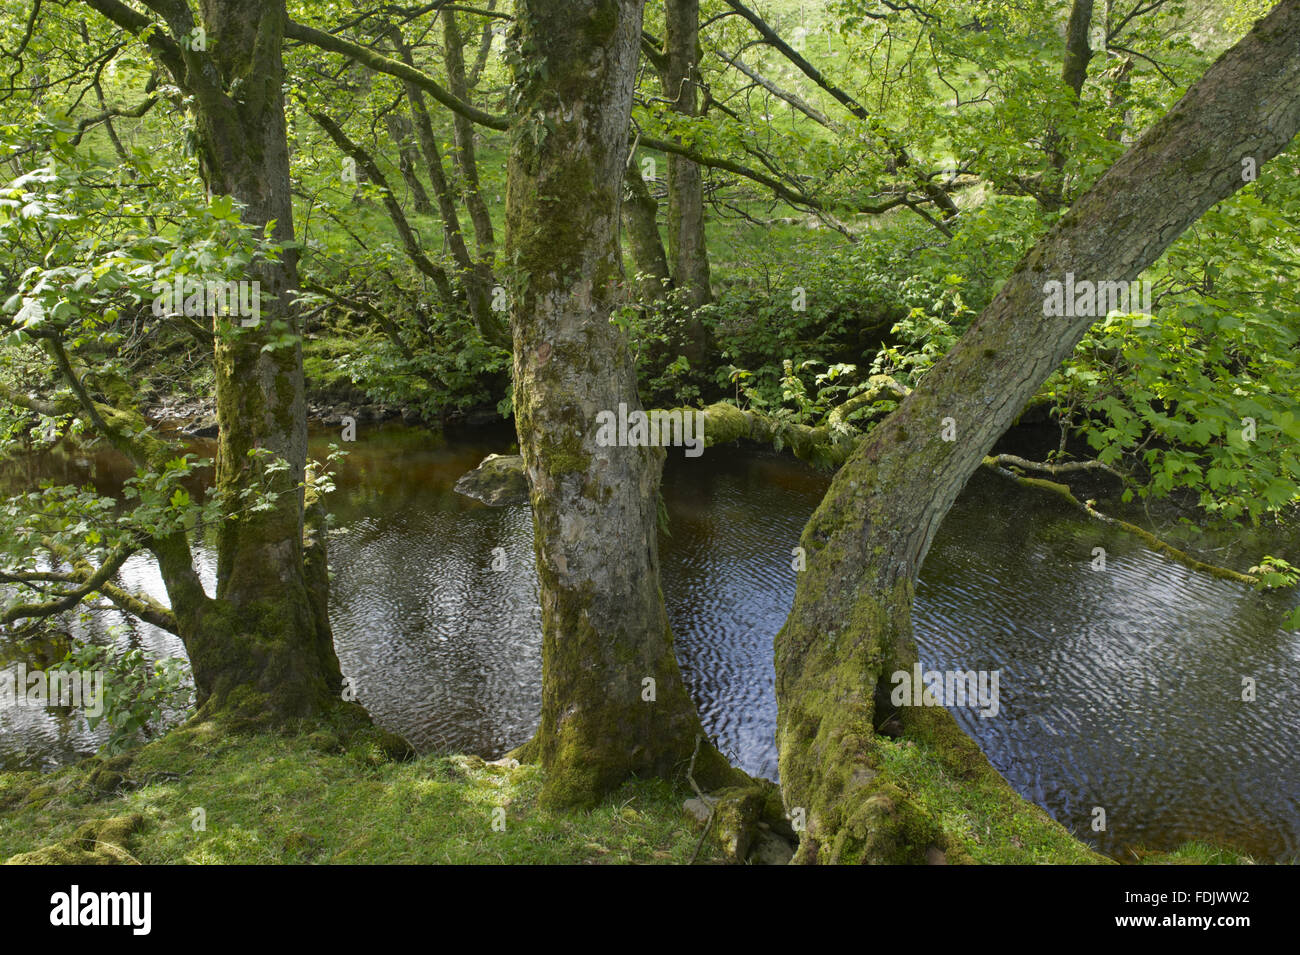 The River Wharfe in Langstrothdale, Yorkshire Dales, North Yorkshire. Stock Photo